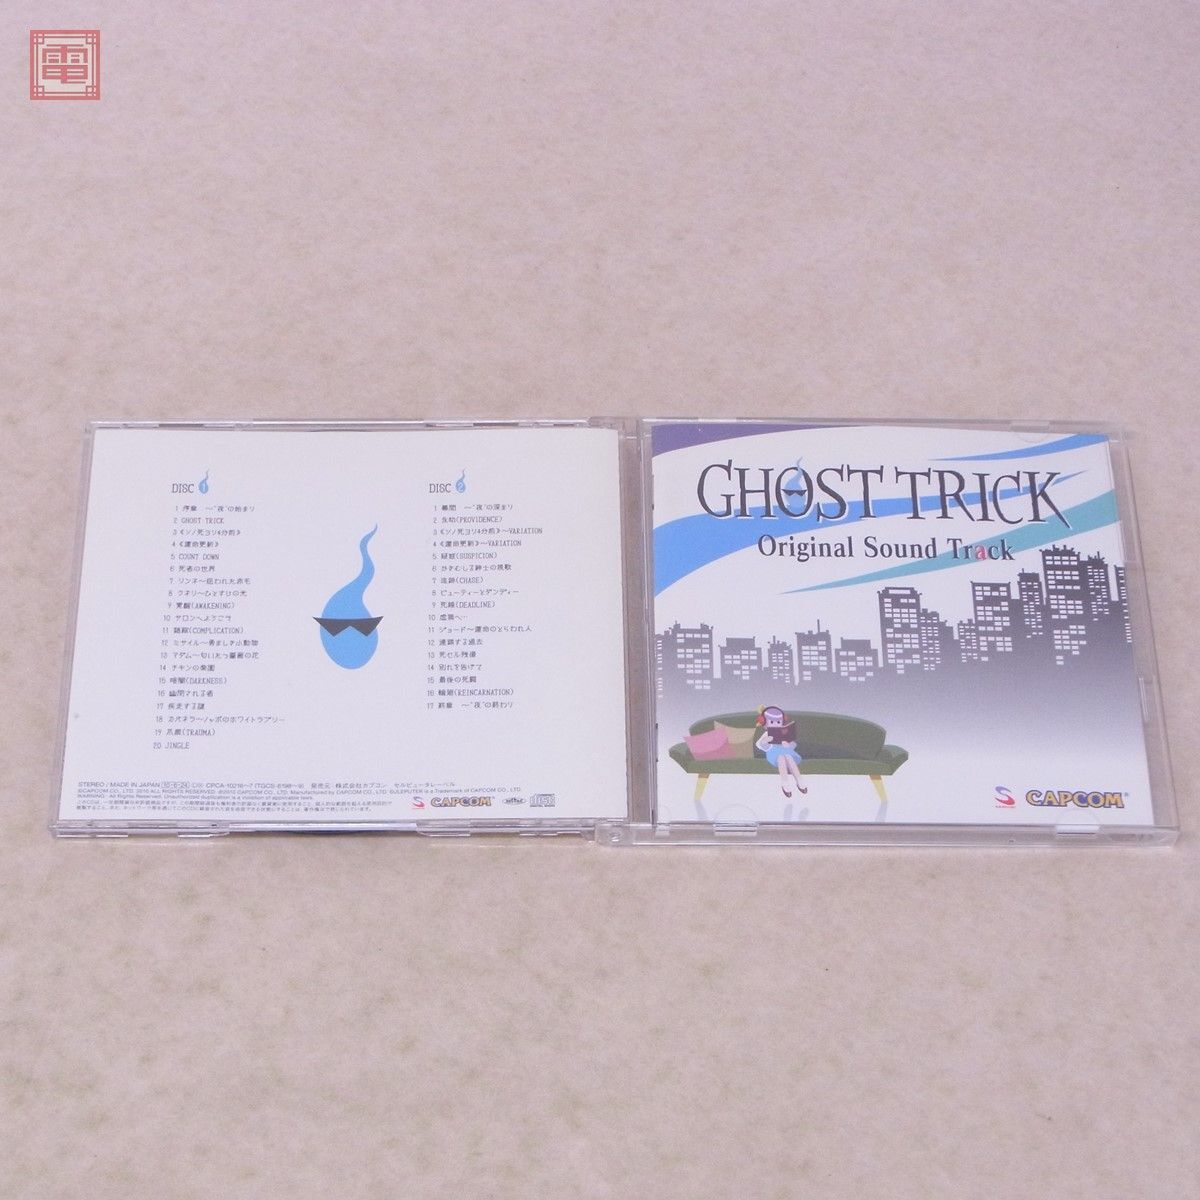  operation guarantee goods CD ghost Trick original * soundtrack Capcom CAPCOM GHOST TRICK Original Sound Track[10